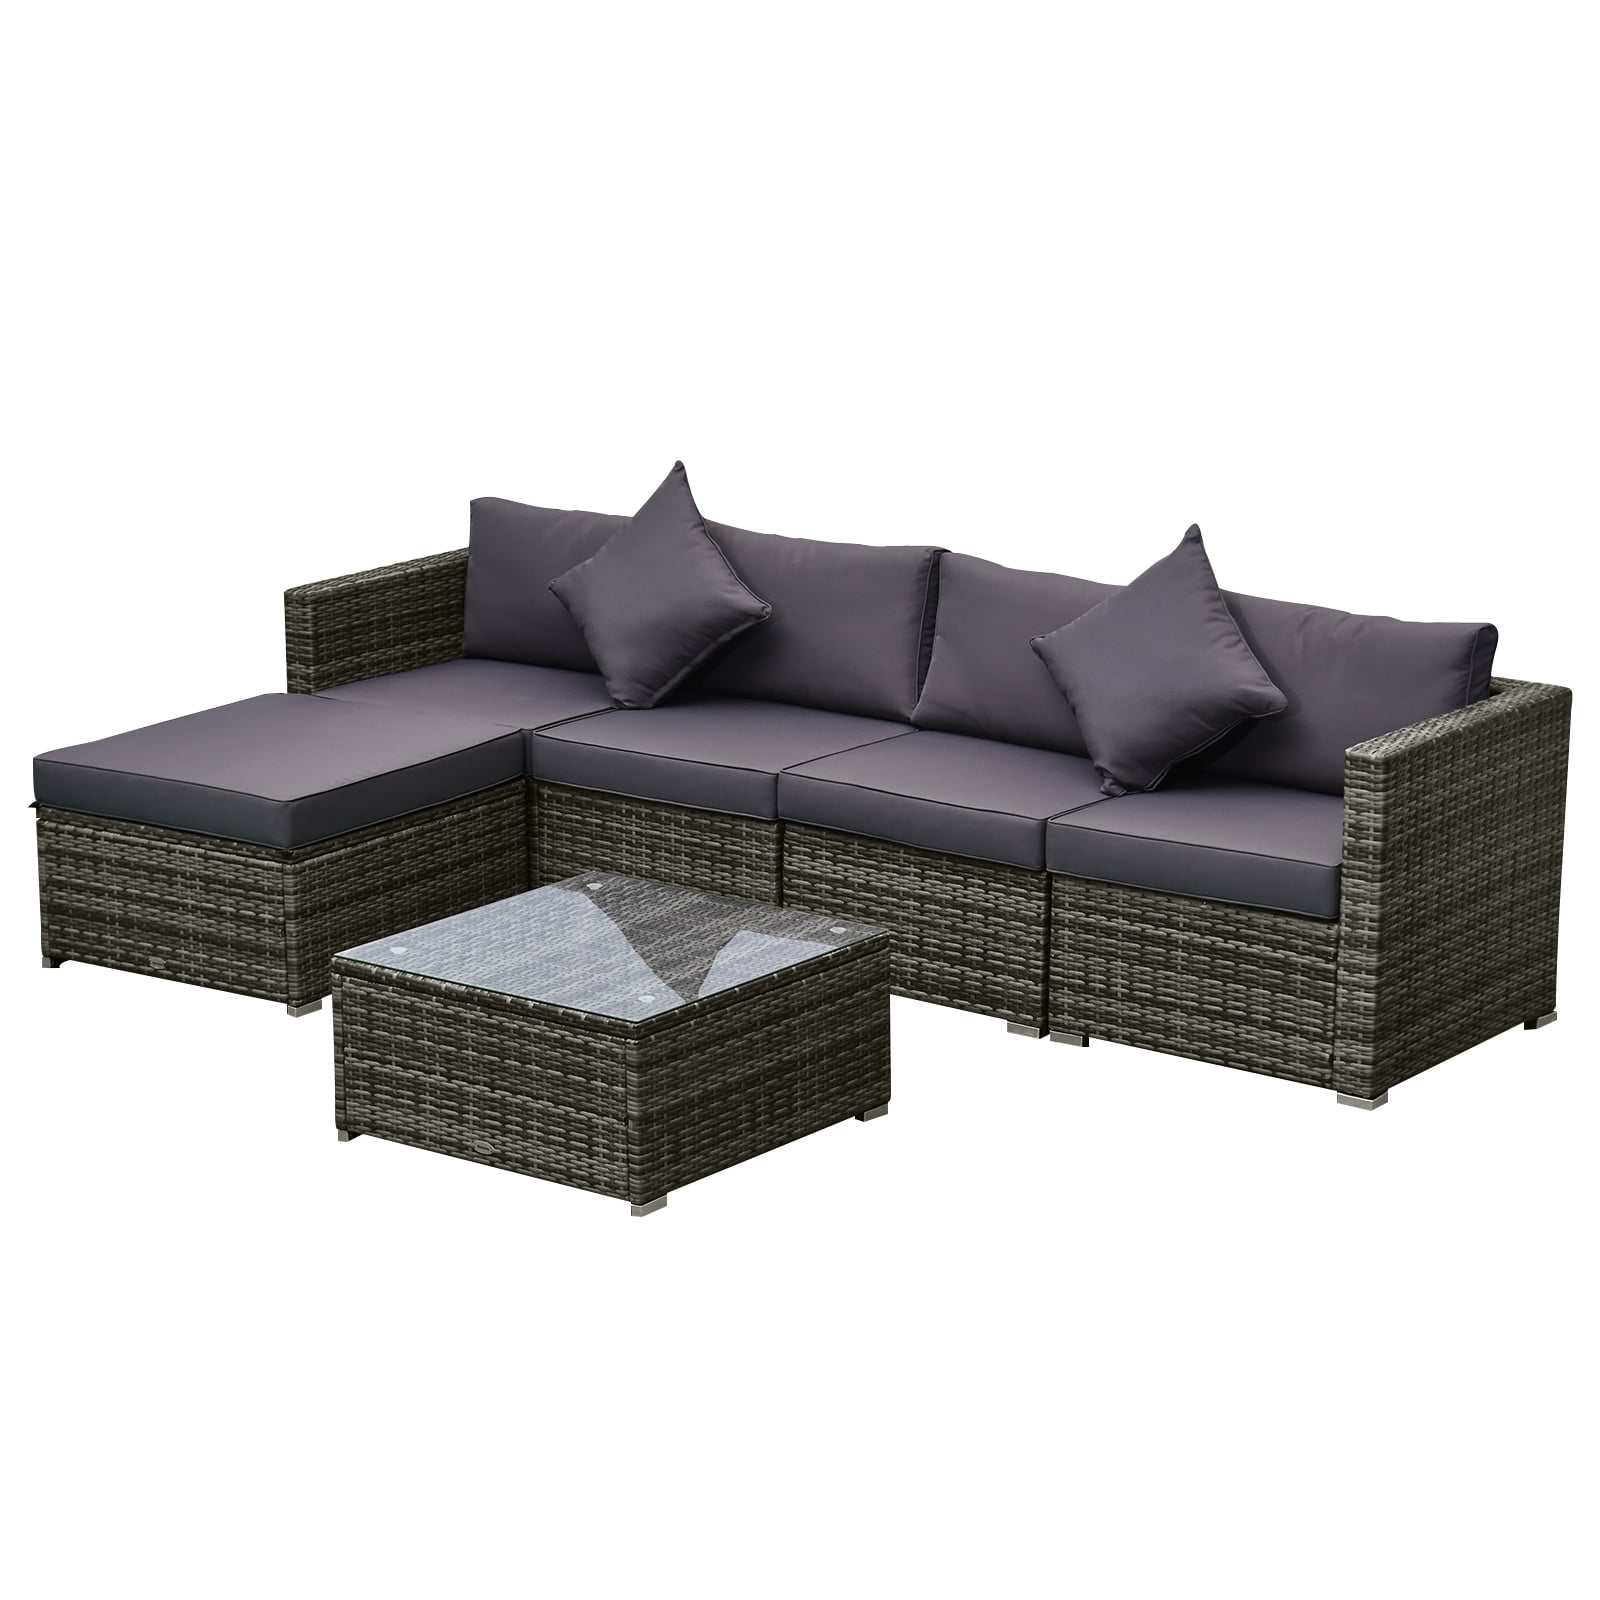 Outsunny 6-Piece Outdoor Patio Rattan Wicker Furniture Set with